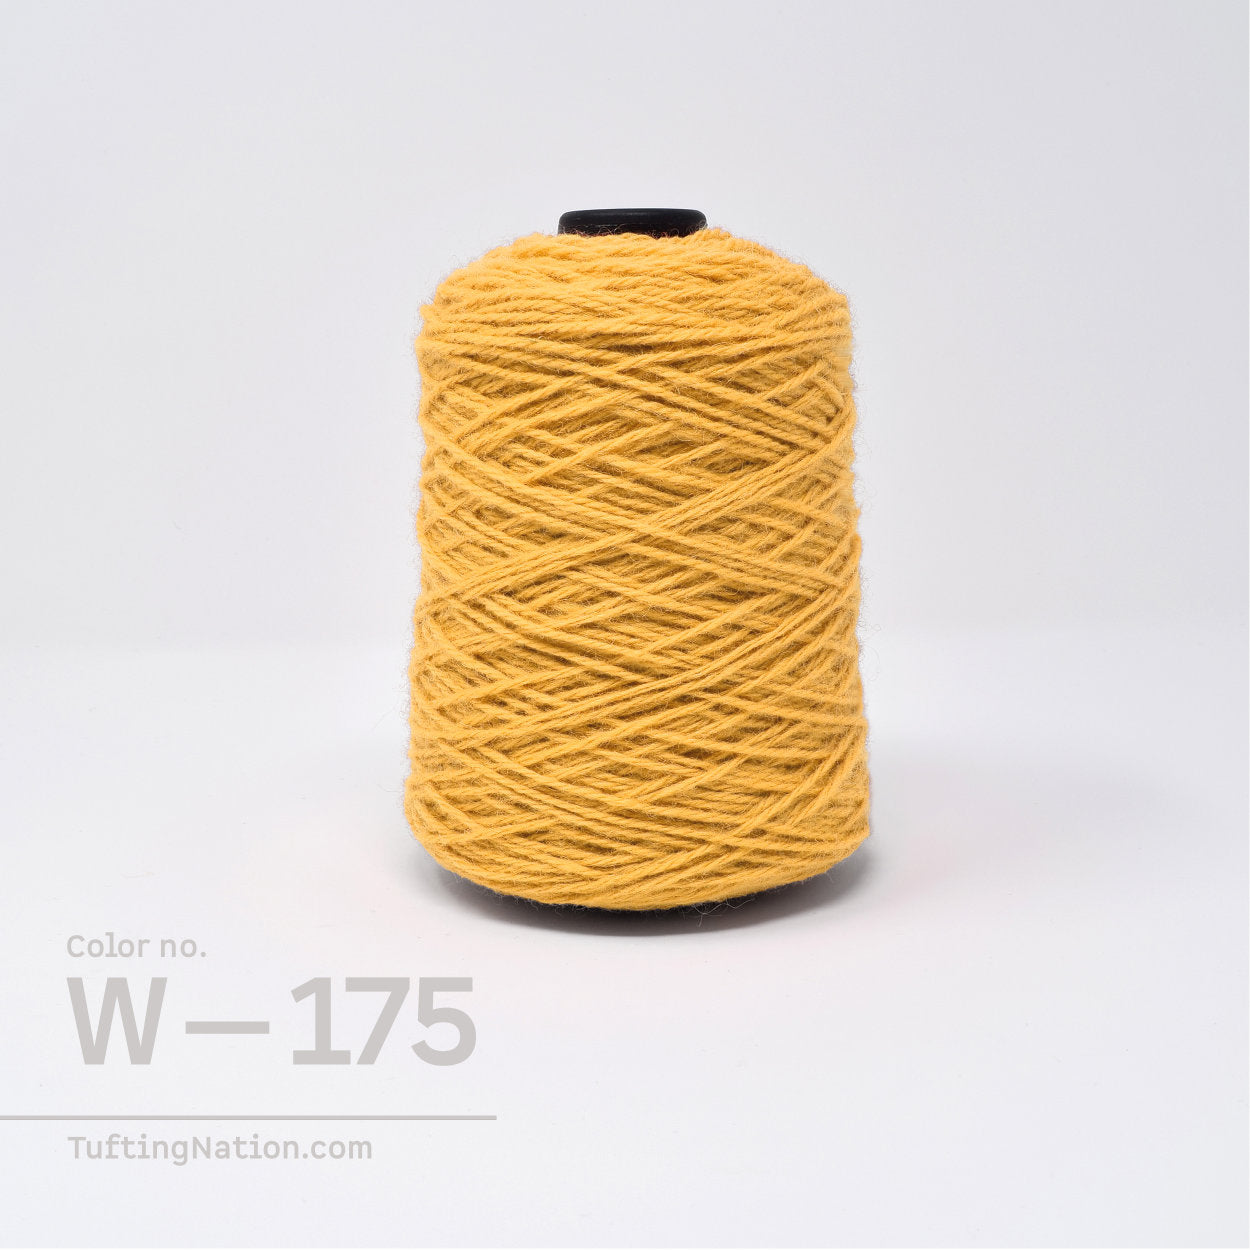 Yellow Wool Tufting Yarn on Cones for Rug making | TuftingNation